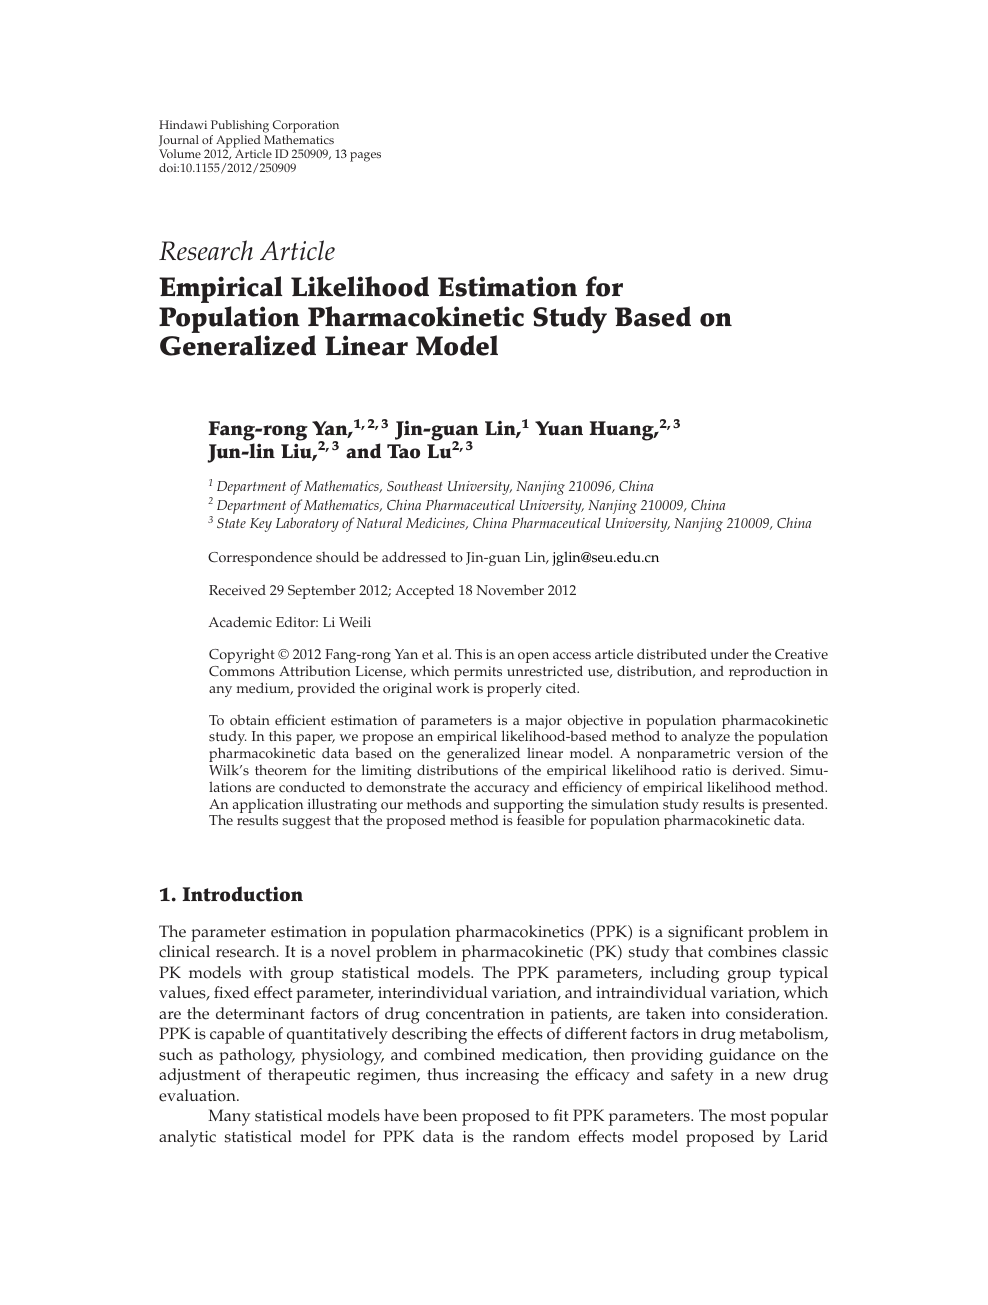 Empirical Likelihood Estimation For Population Pharmacokinetic Study Based On Generalized Linear Model Topic Of Research Paper In Mathematics Download Scholarly Article Pdf And Read For Free On Cyberleninka Open Science Hub